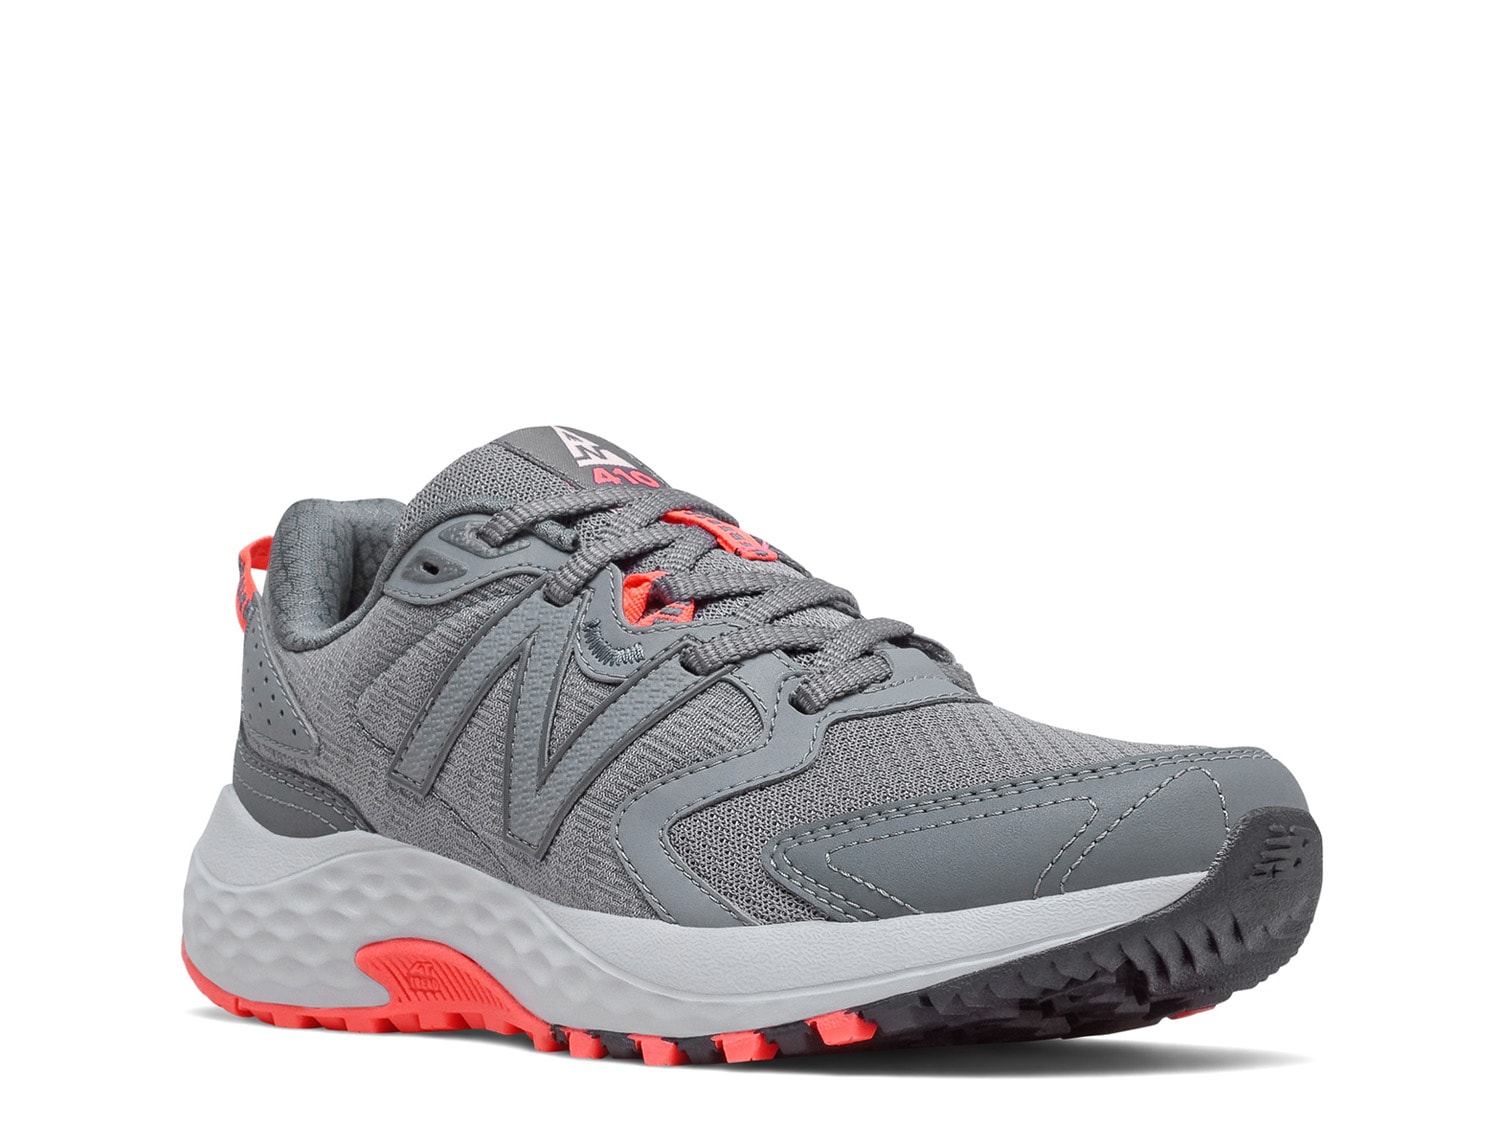 new balance 410 trail running shoes